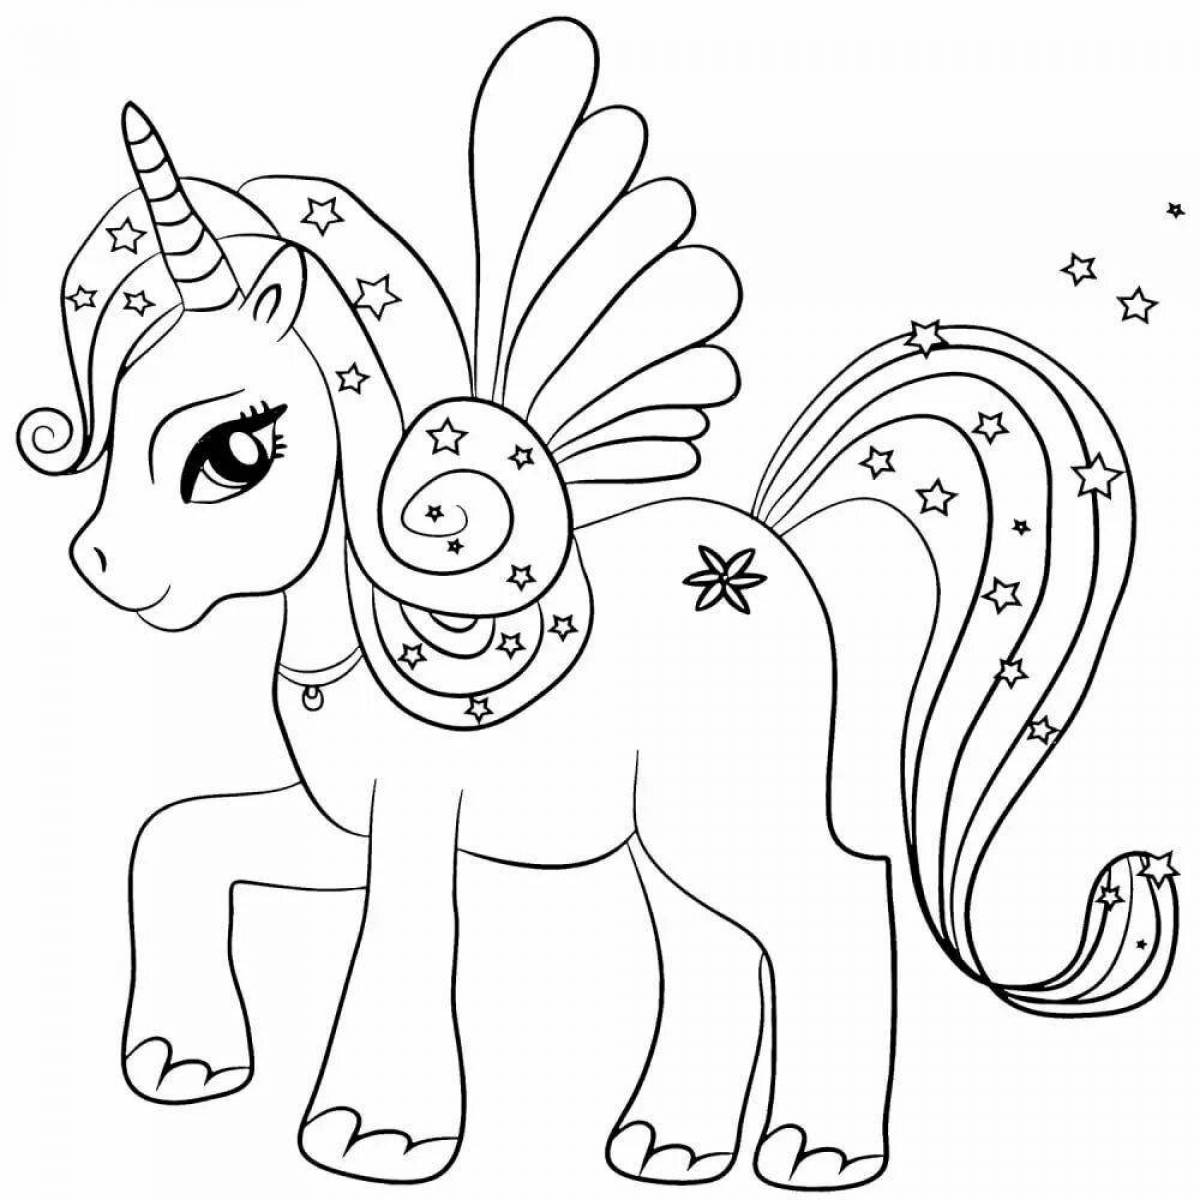 Shiny unicorn coloring book for 5 year old girls